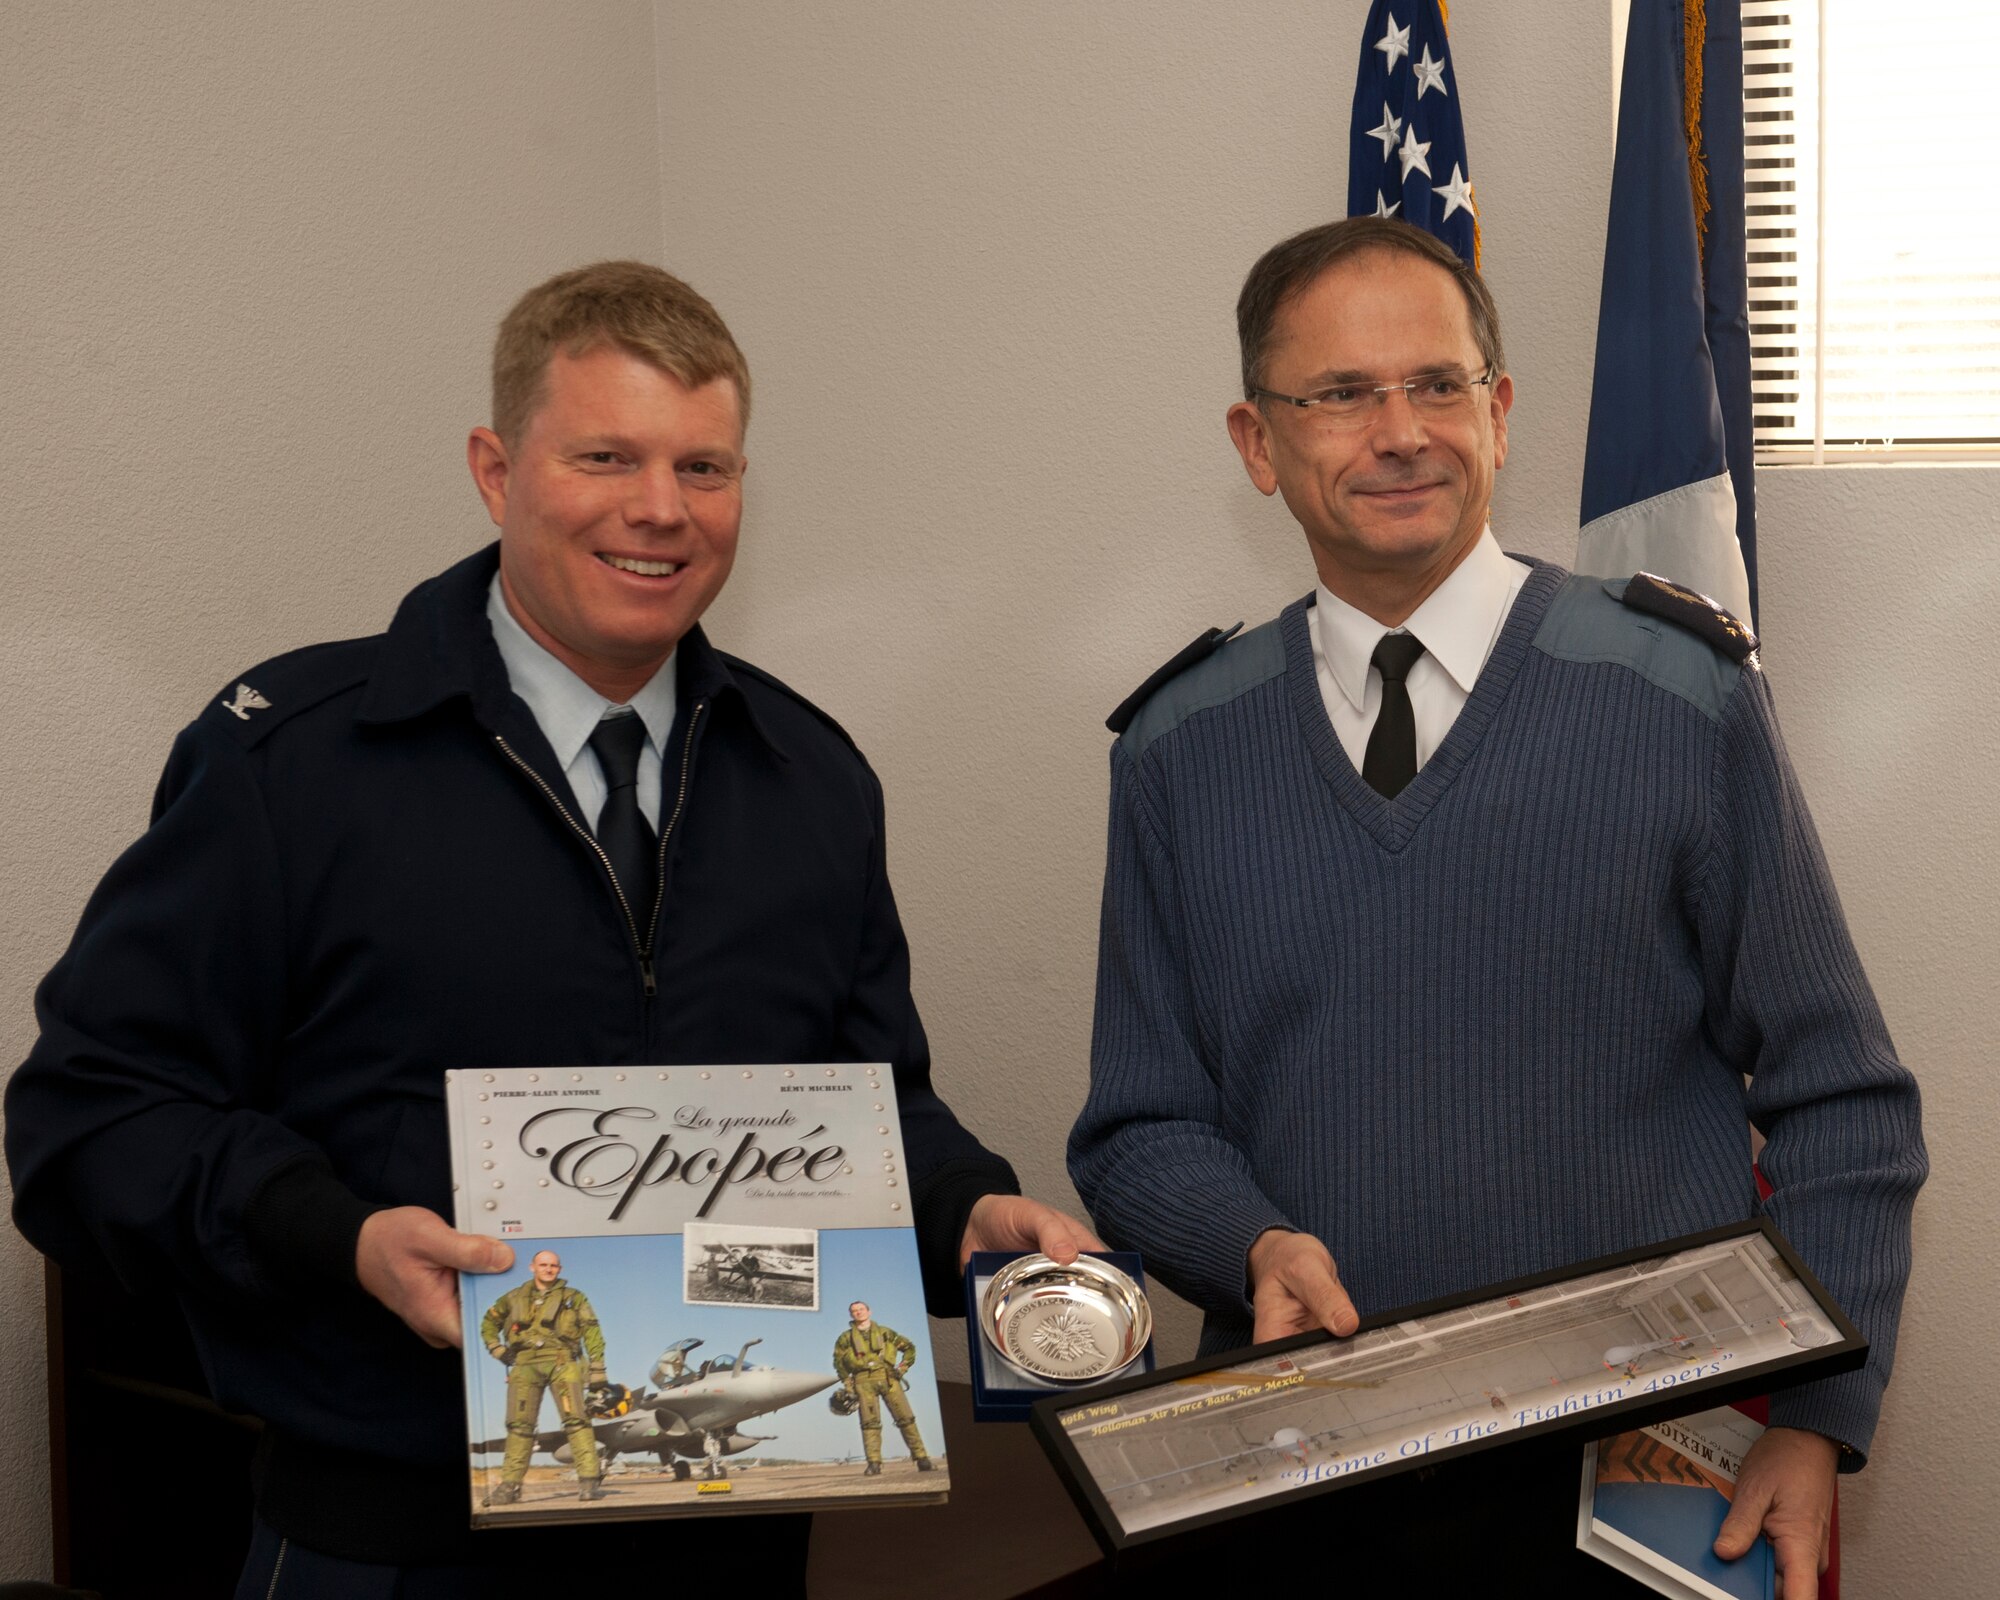 Colonel Andrew Croft, 49th Wing commander, exchanges gifts with Lt. Gen. Antoine Creux, French air force deputy chief of staff, at Holloman Air Force Base, N.M., Nov. 26. The French air force worked in collaboration with Holloman AFB to graduate six student pilots and sensor operators from the 16th Training Squadron.  The students became the first-ever French air force members to learn the MQ-9 Reaper system.  Their landmark graduation will mark the beginning of future coalition efforts between France and the United States to better utilize Remotely Piloted Aircraft across the world, Creux visited Holloman AFB both to take part in the graduation ceremony, and to tour Holloman AFB’s MQ-9 training facilities. (U.S. Air Force phot by Airman 1st Class Daniel E. Liddicoet/Released)

